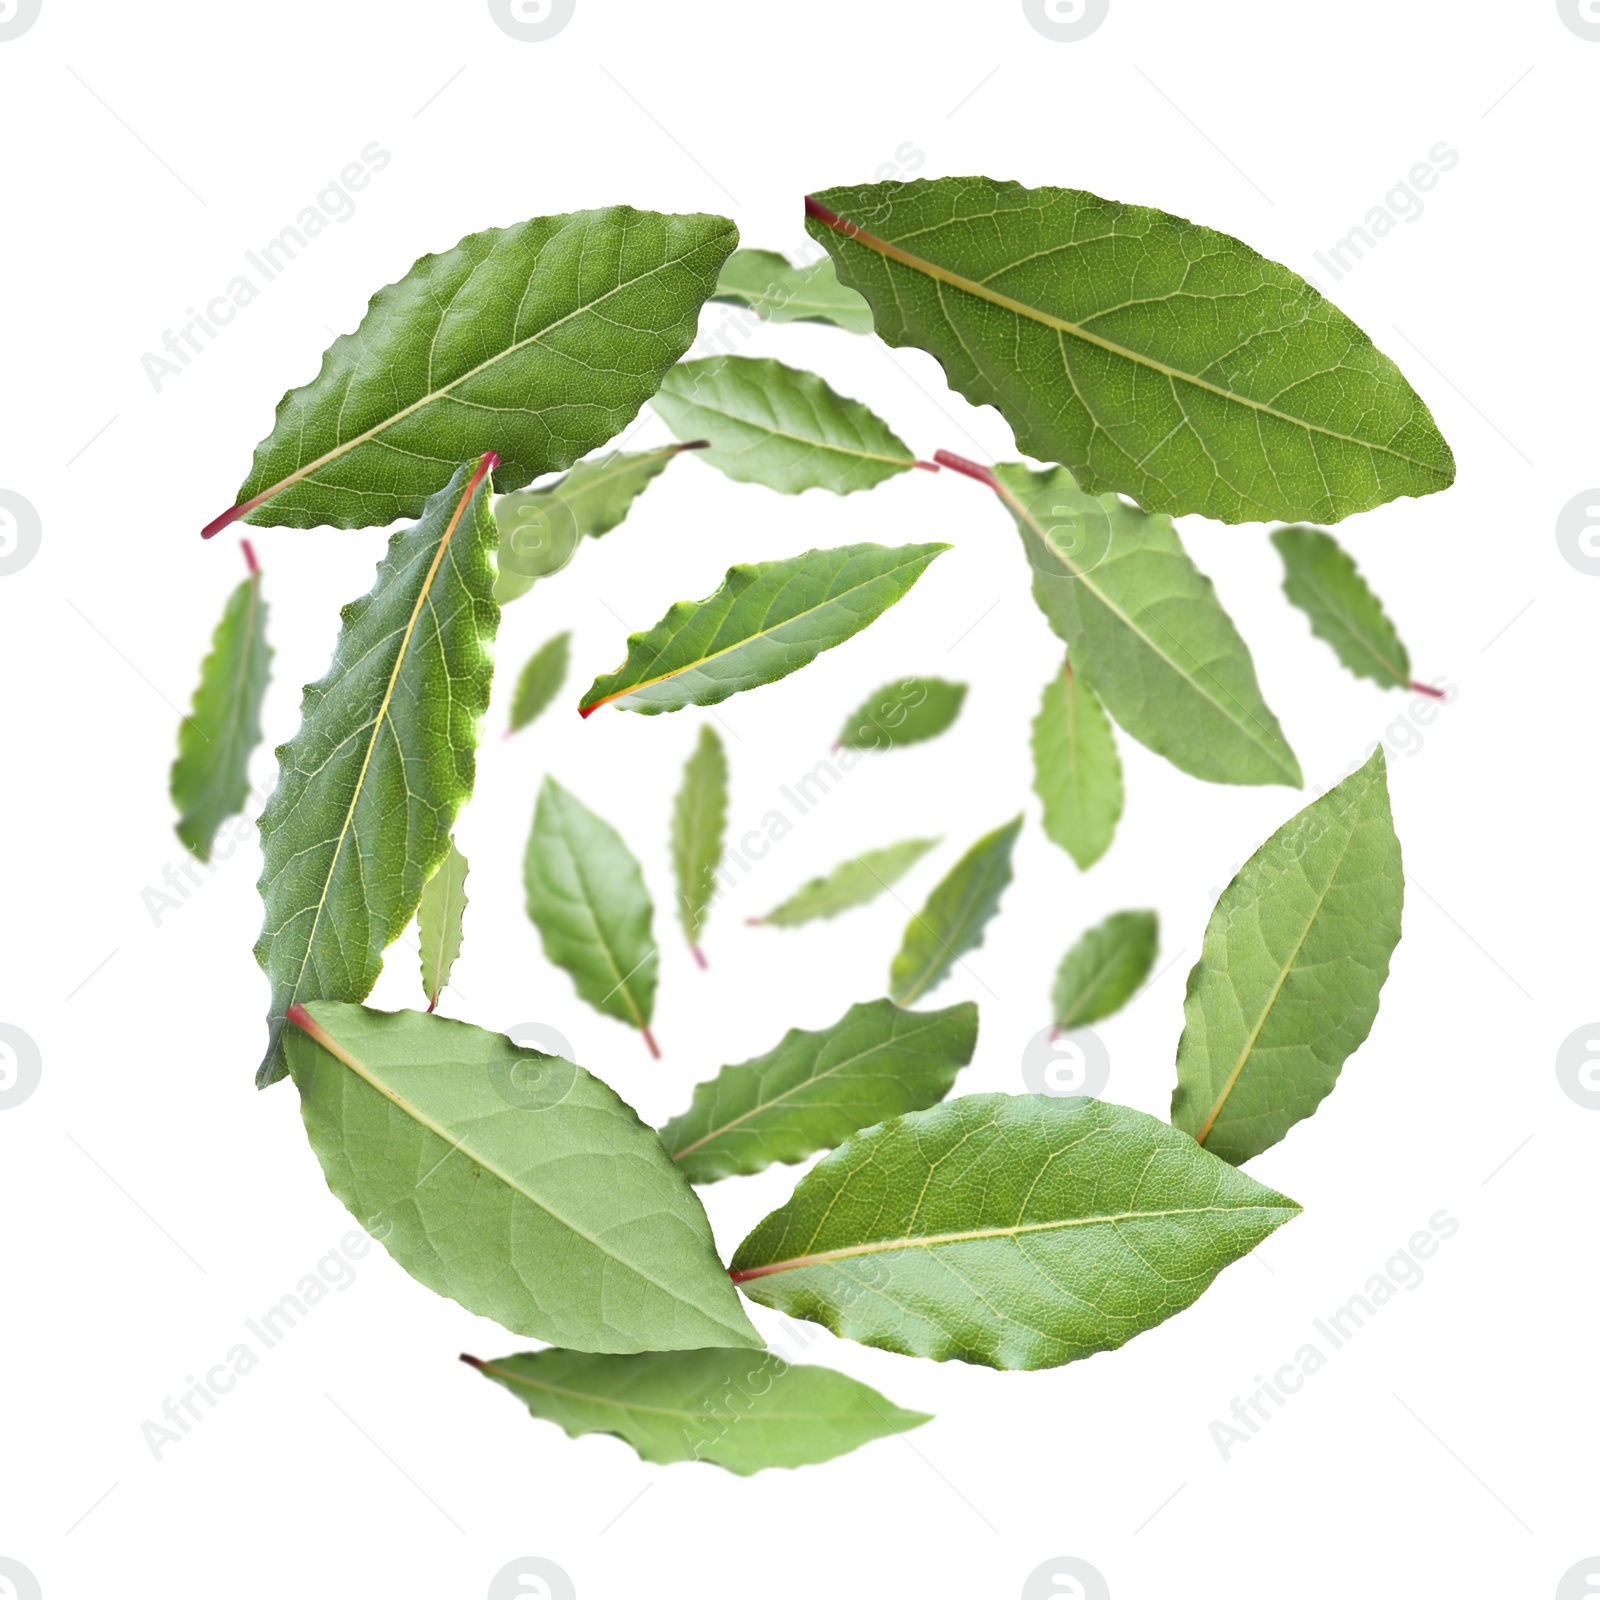 Image of Fresh bay leaves whirling on white background